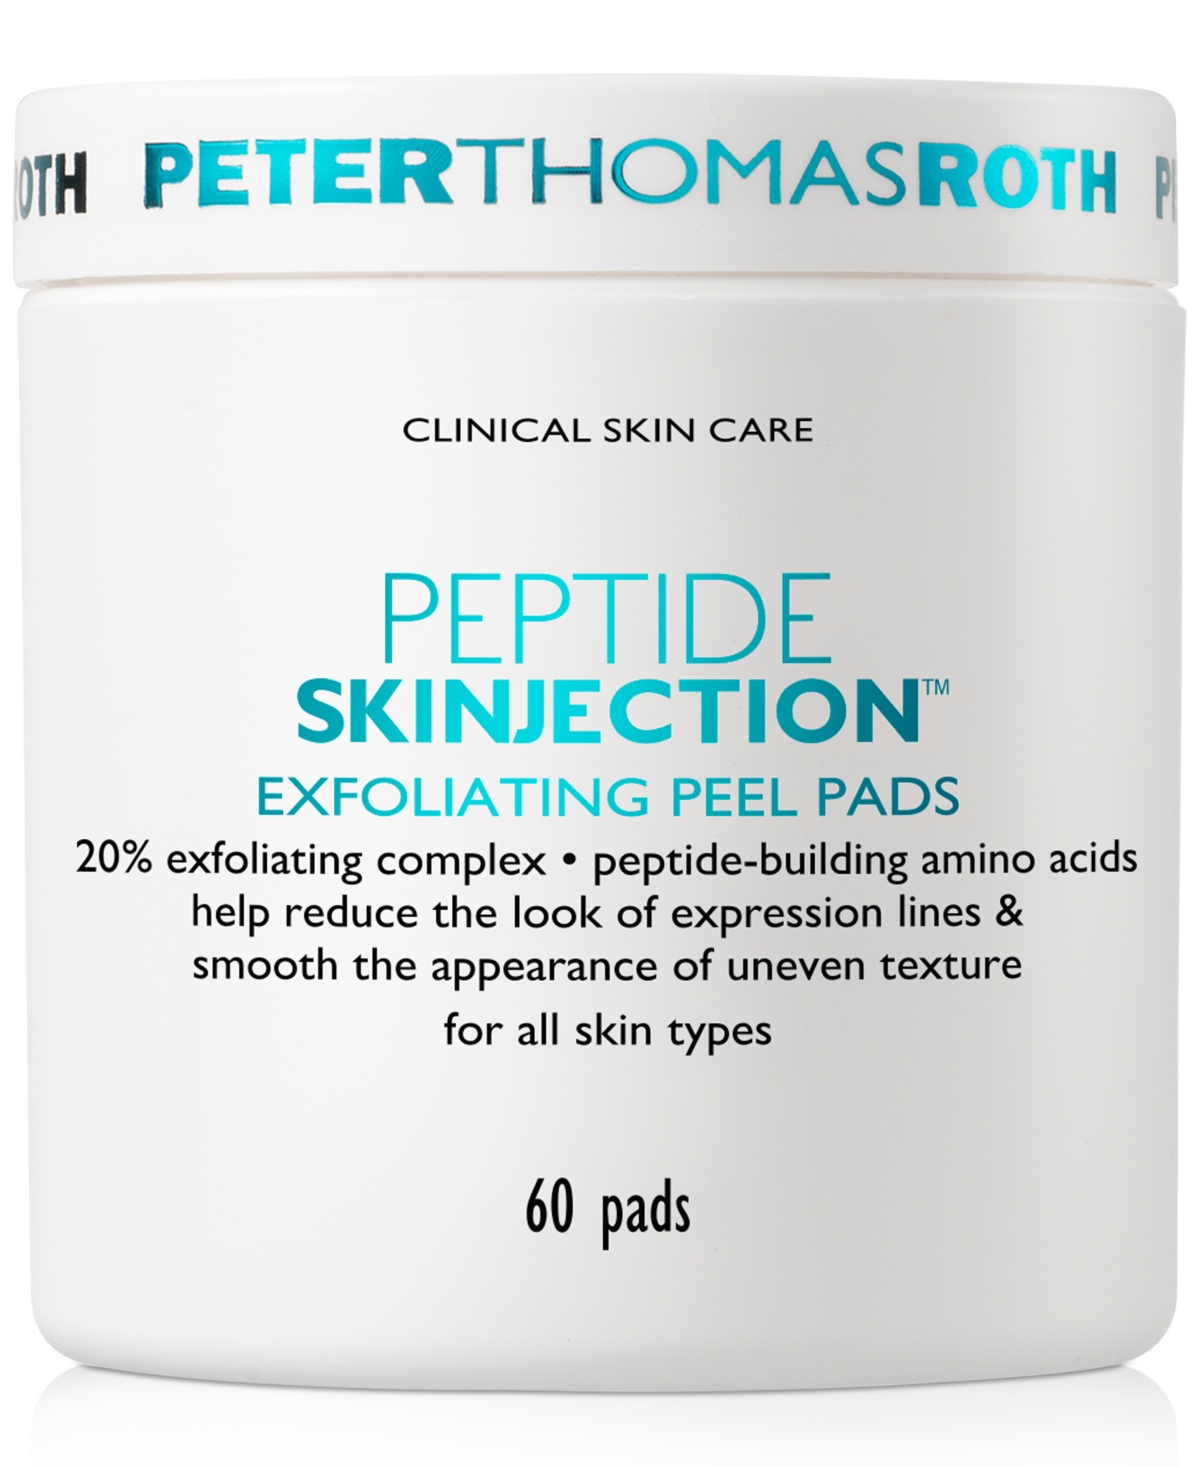 Peptide Skinjection Exfoliating Peel Pads, 60 pads